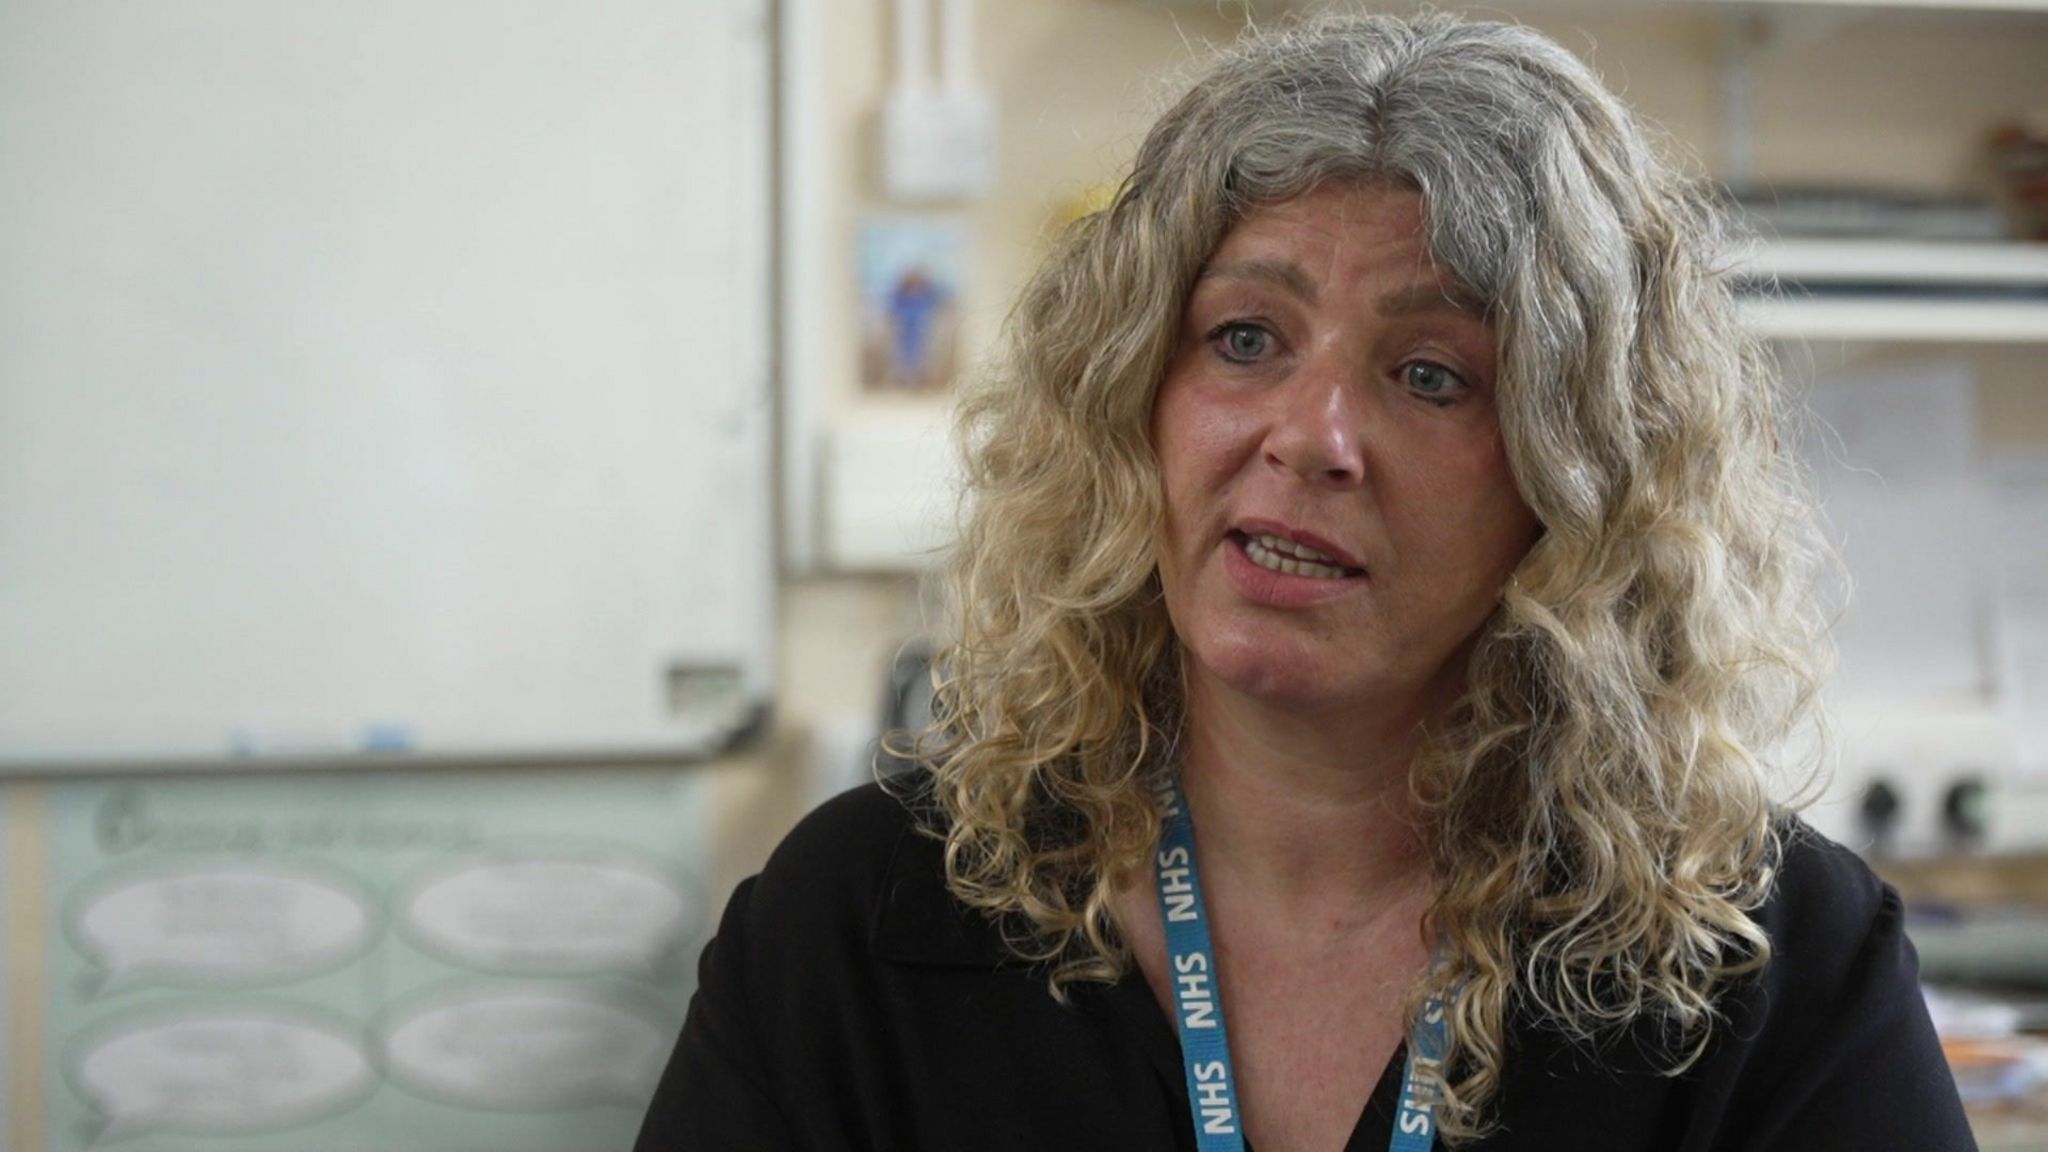 Woman with curly hair and NHS lanyard